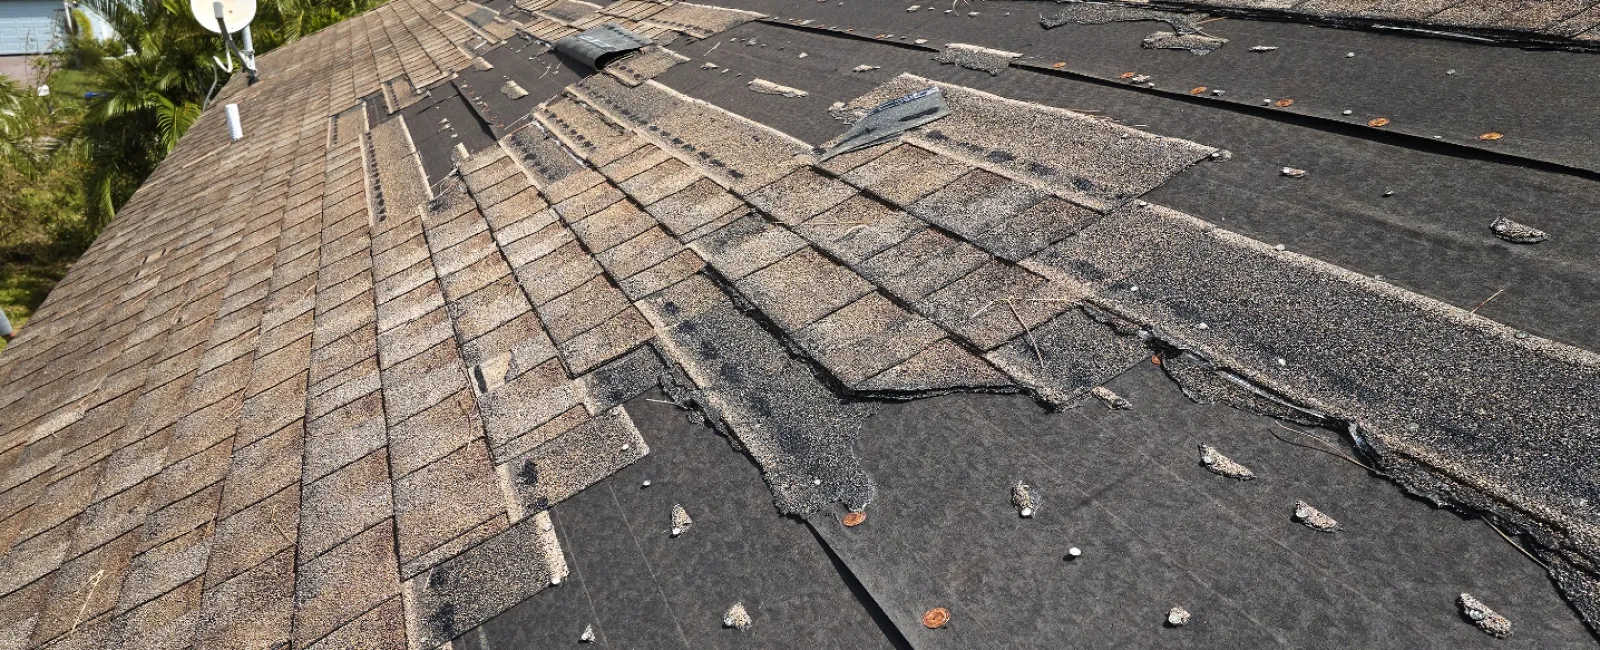 What Type of Damage can Storms Cause to Roofs?